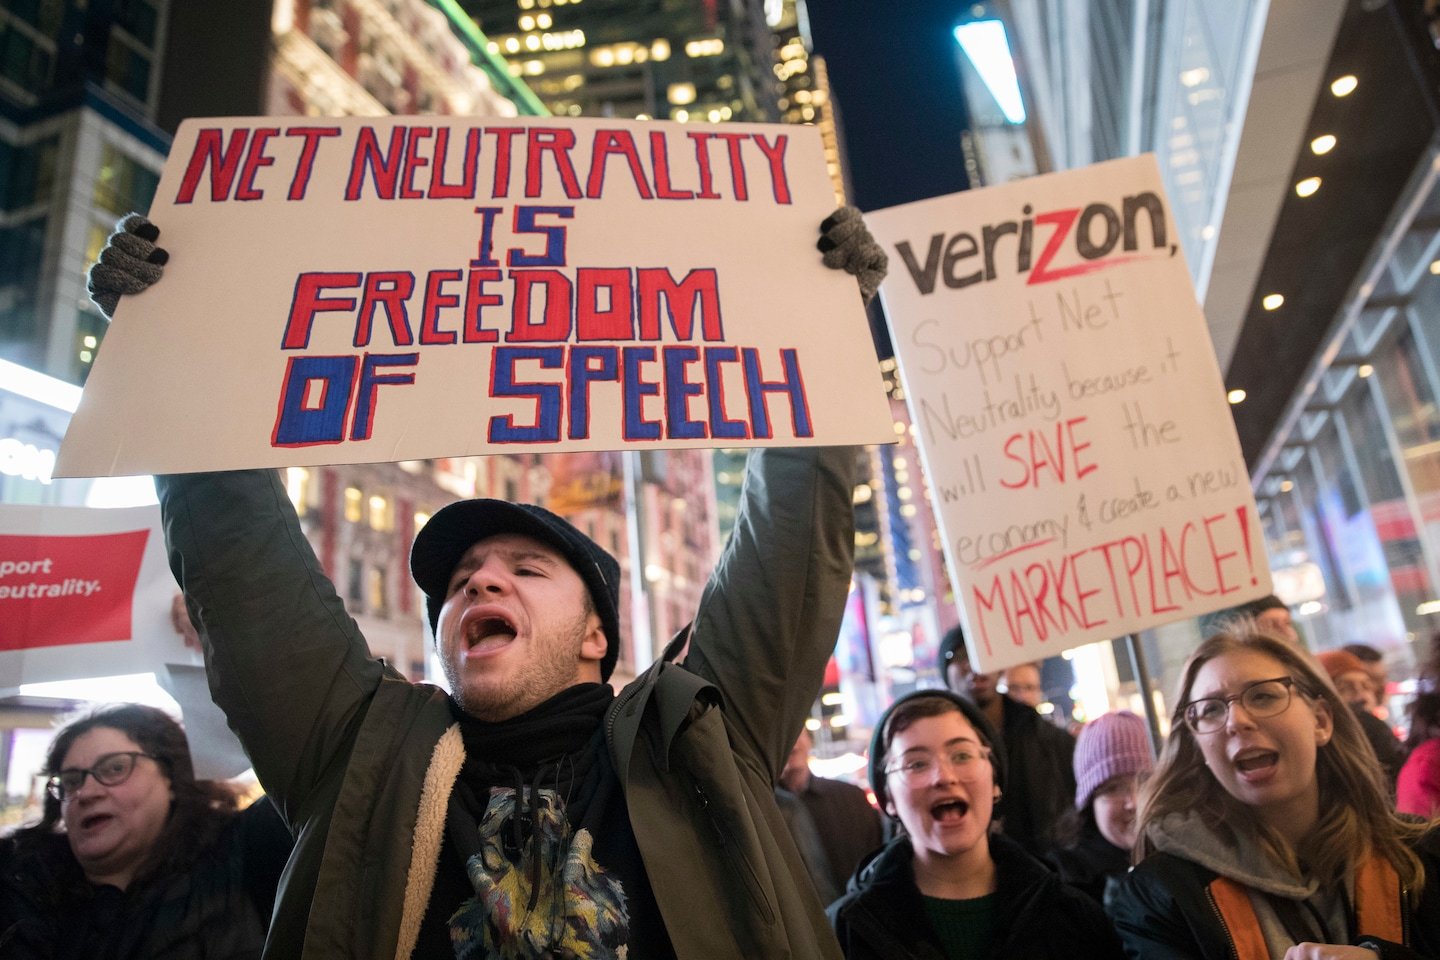 Appeals court ruling upholds FCC’s canceling of net neutrality rules